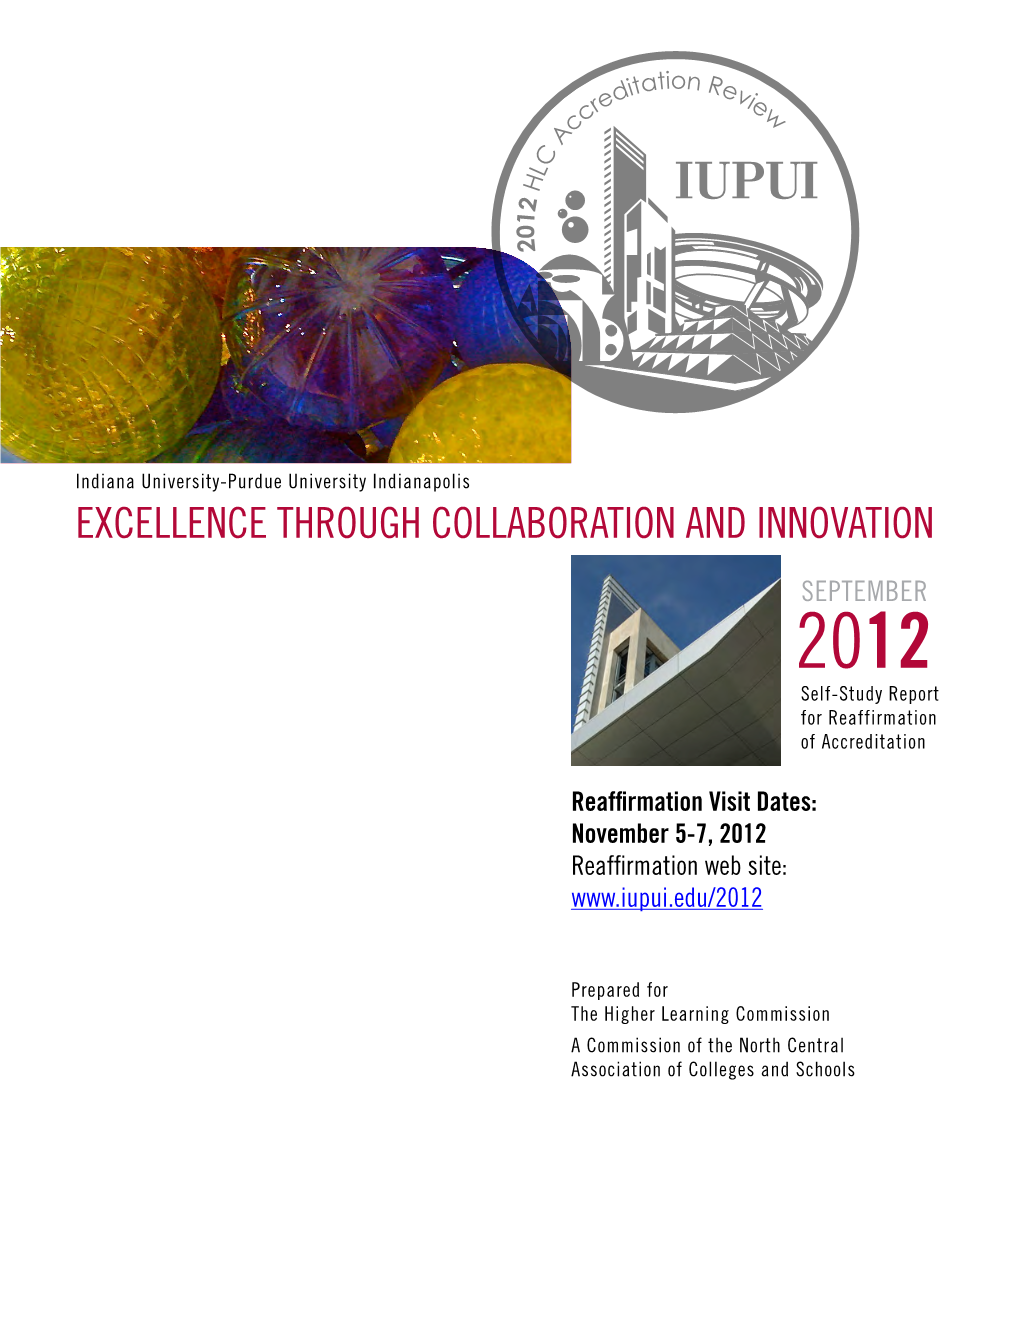 Excellence Through Collaboration and Innovation